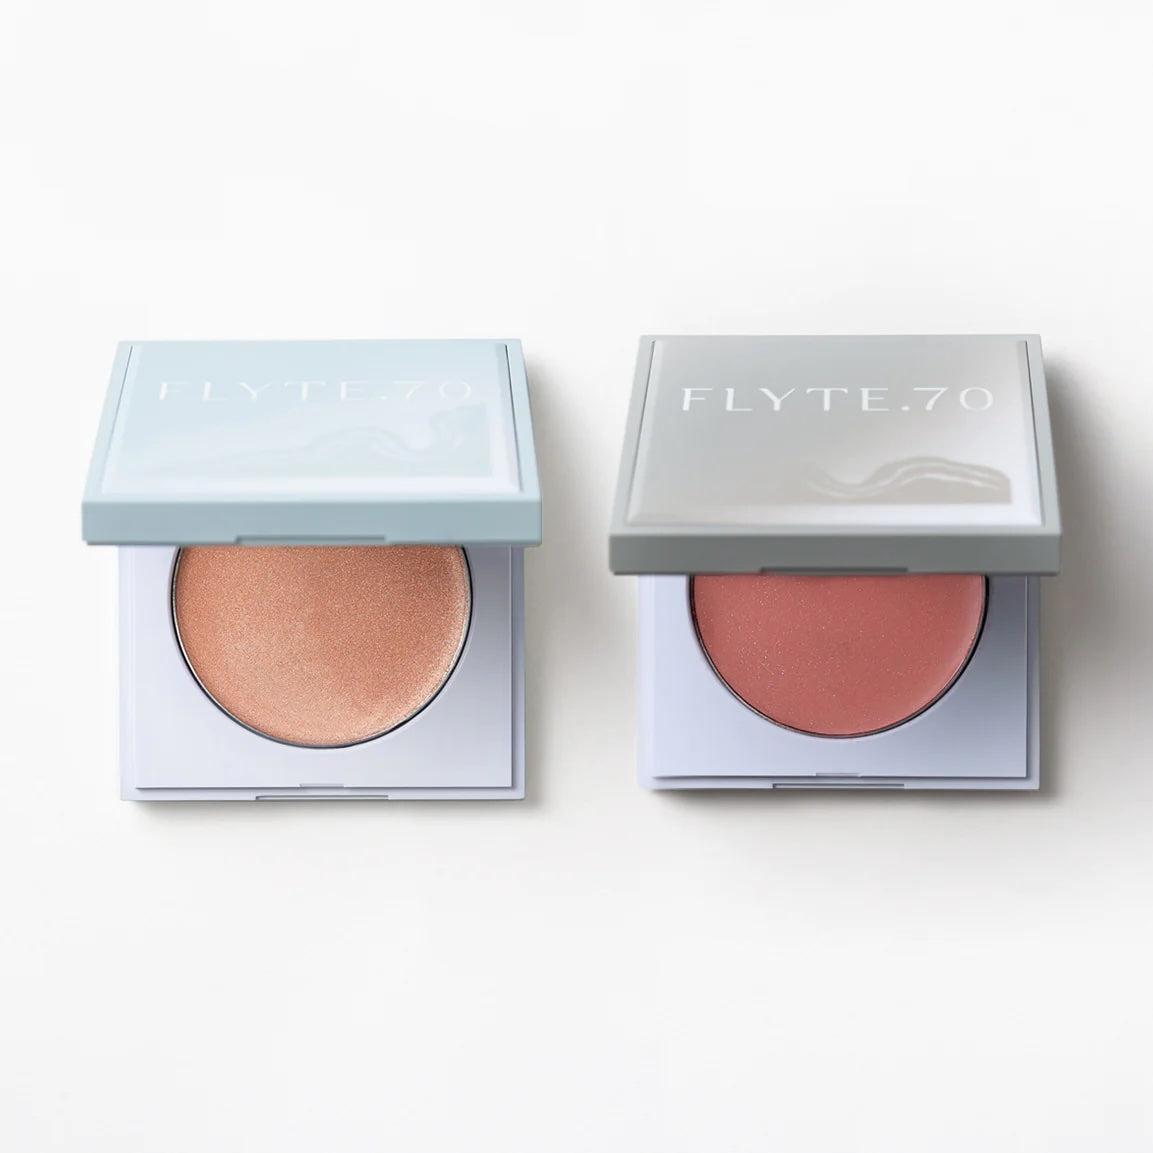 Compacts of complementary highlighter and cream blush in warm apricot and blushed rose